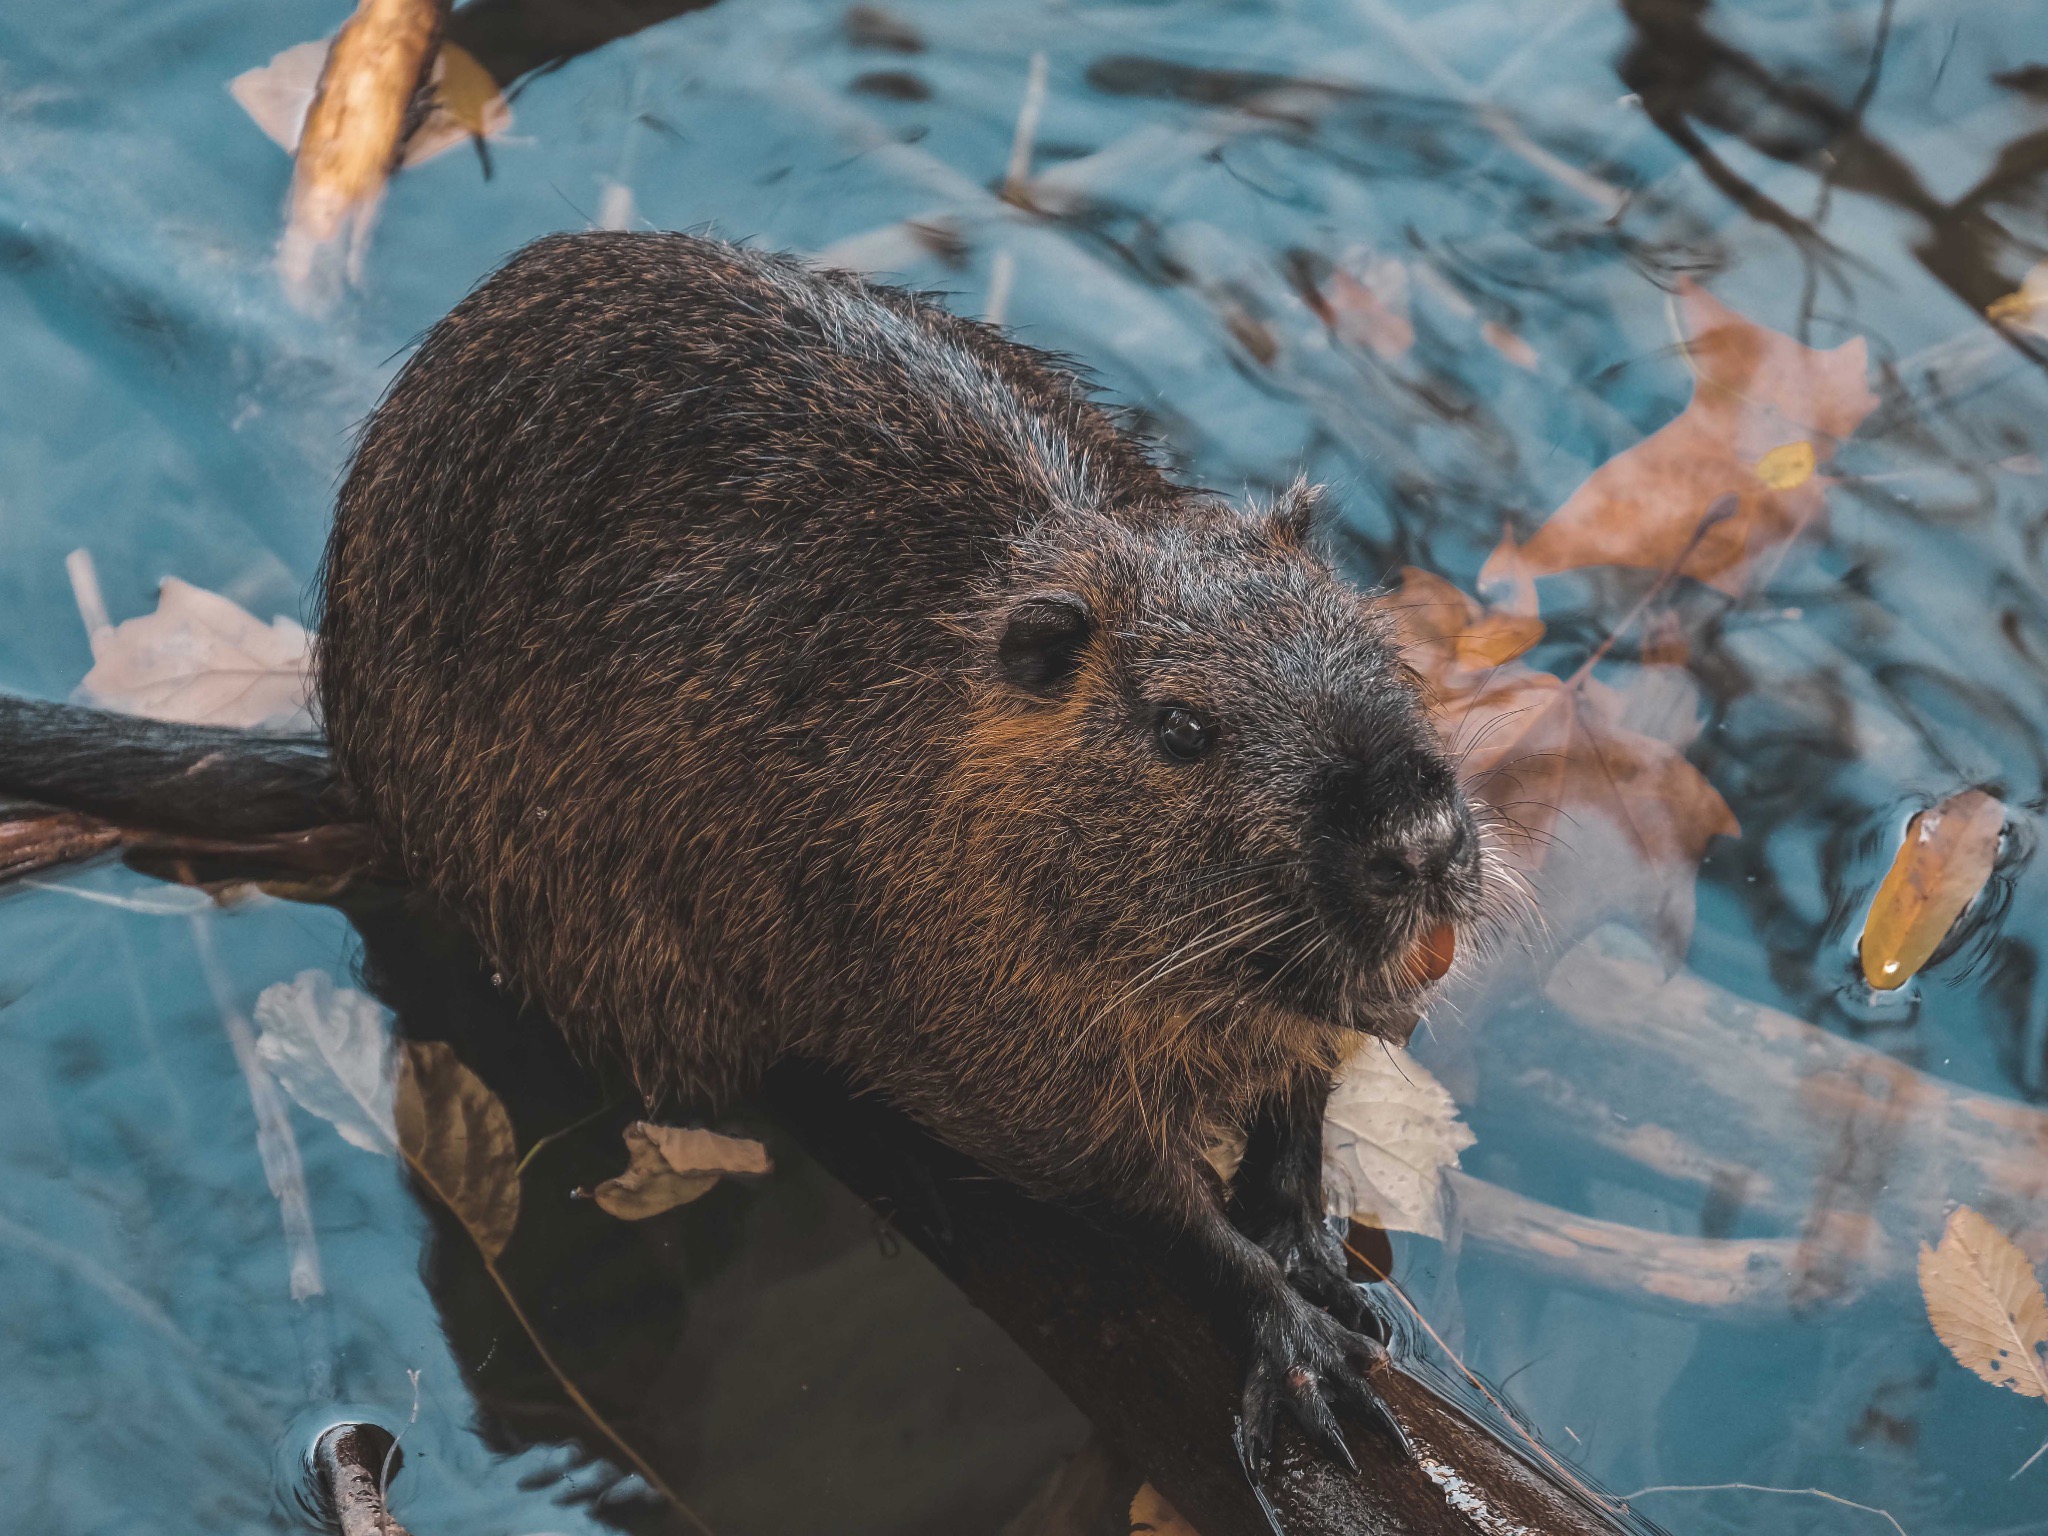 Green Terms and Phrases: The beaver is an example of a keystone species.